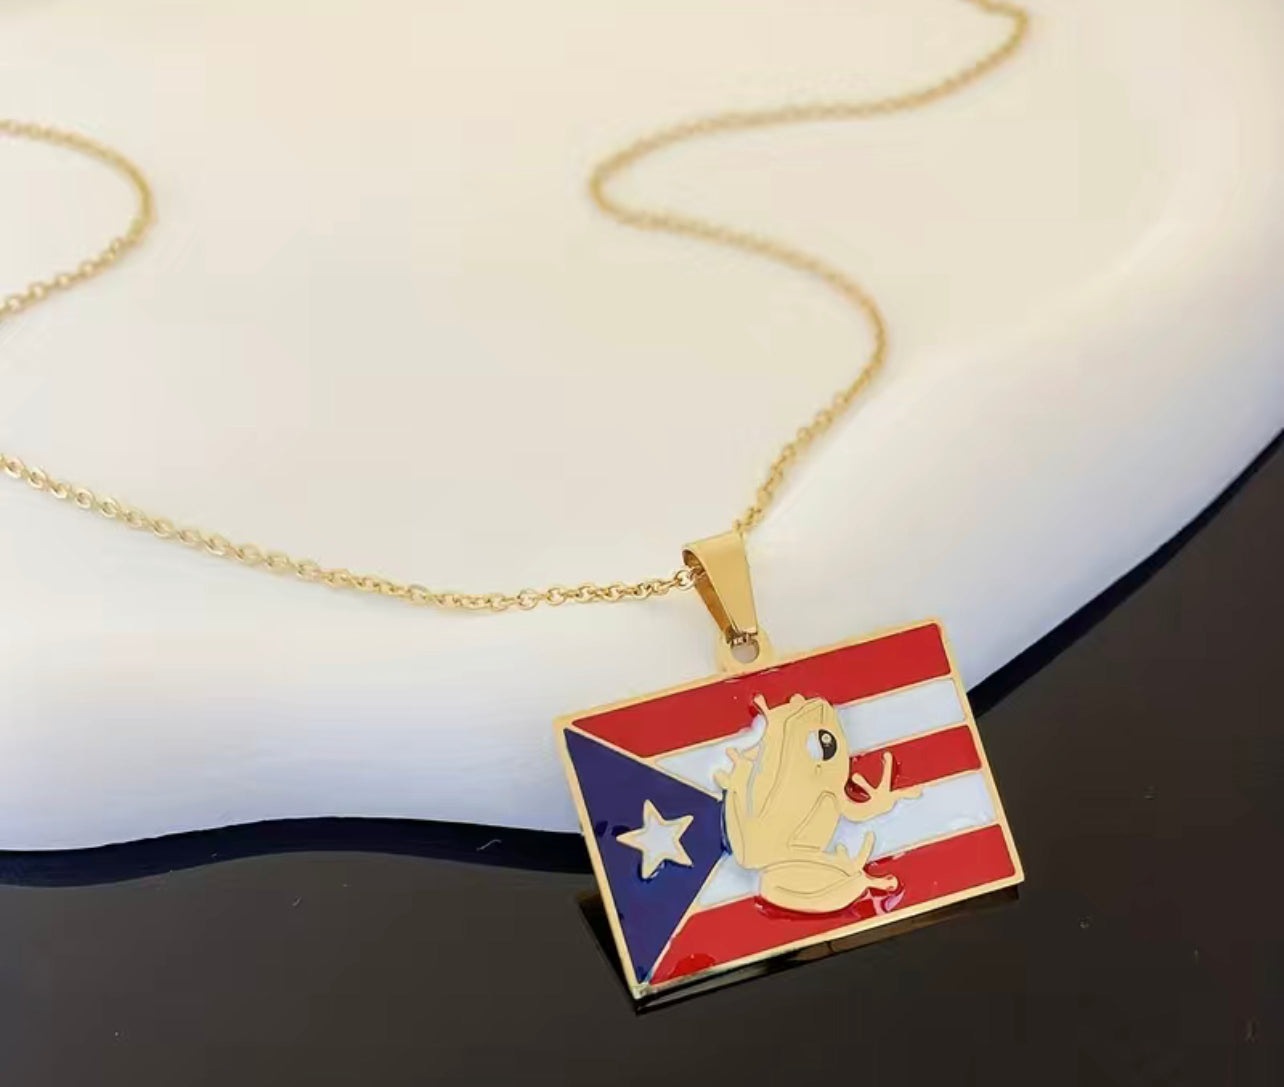 18K Gold Plated Stainless Steel Puerto Rico Flag Necklace & Pendant, White  Nacre | eBay